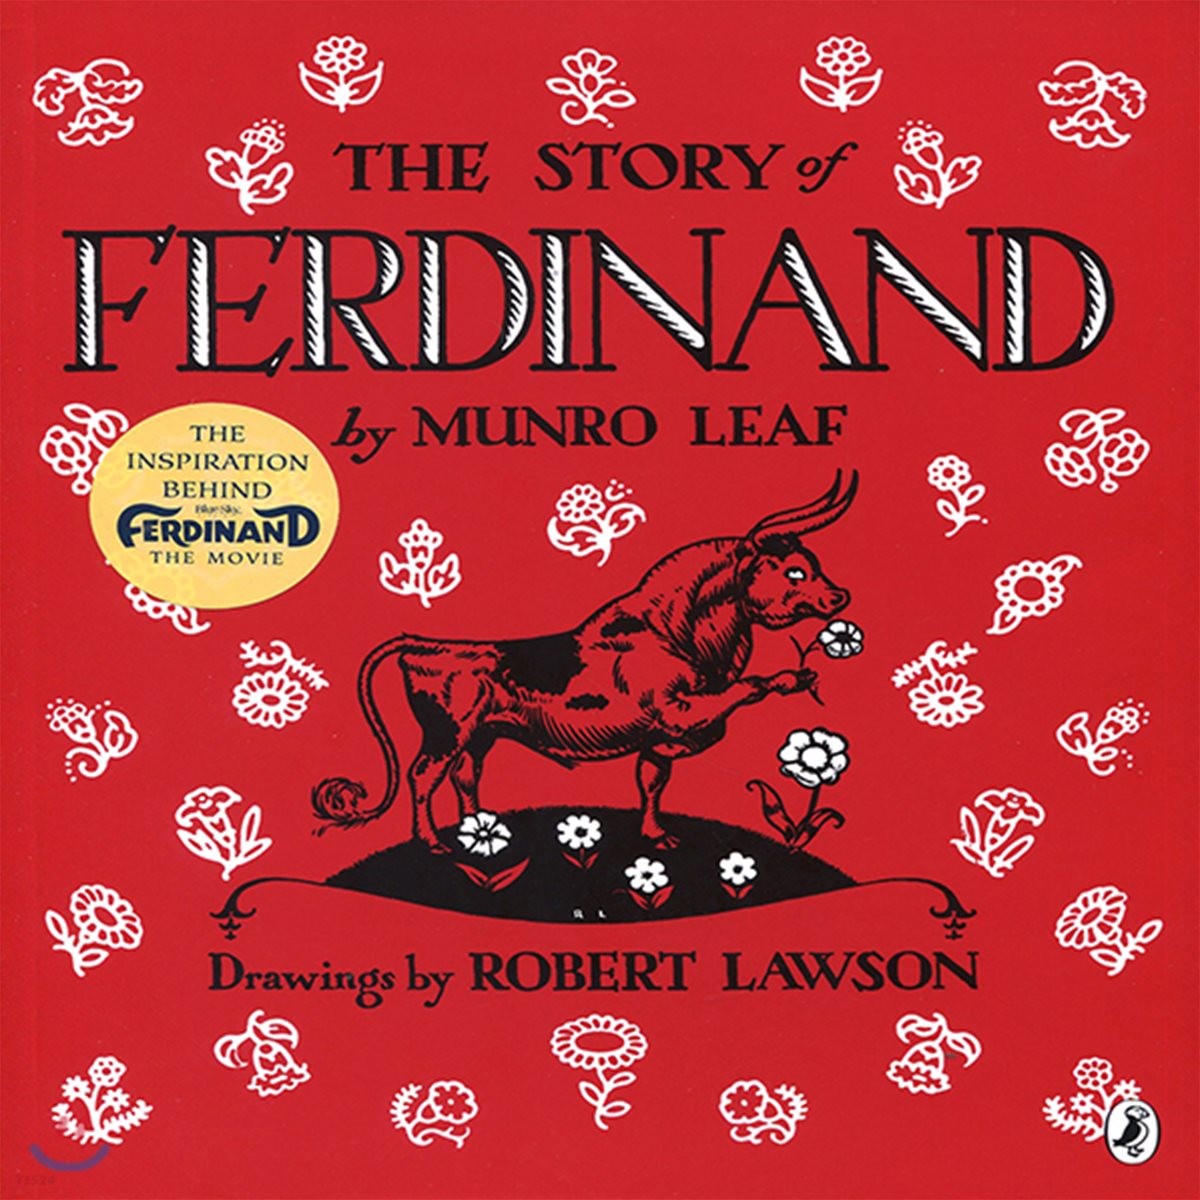 (The story of)ferninand